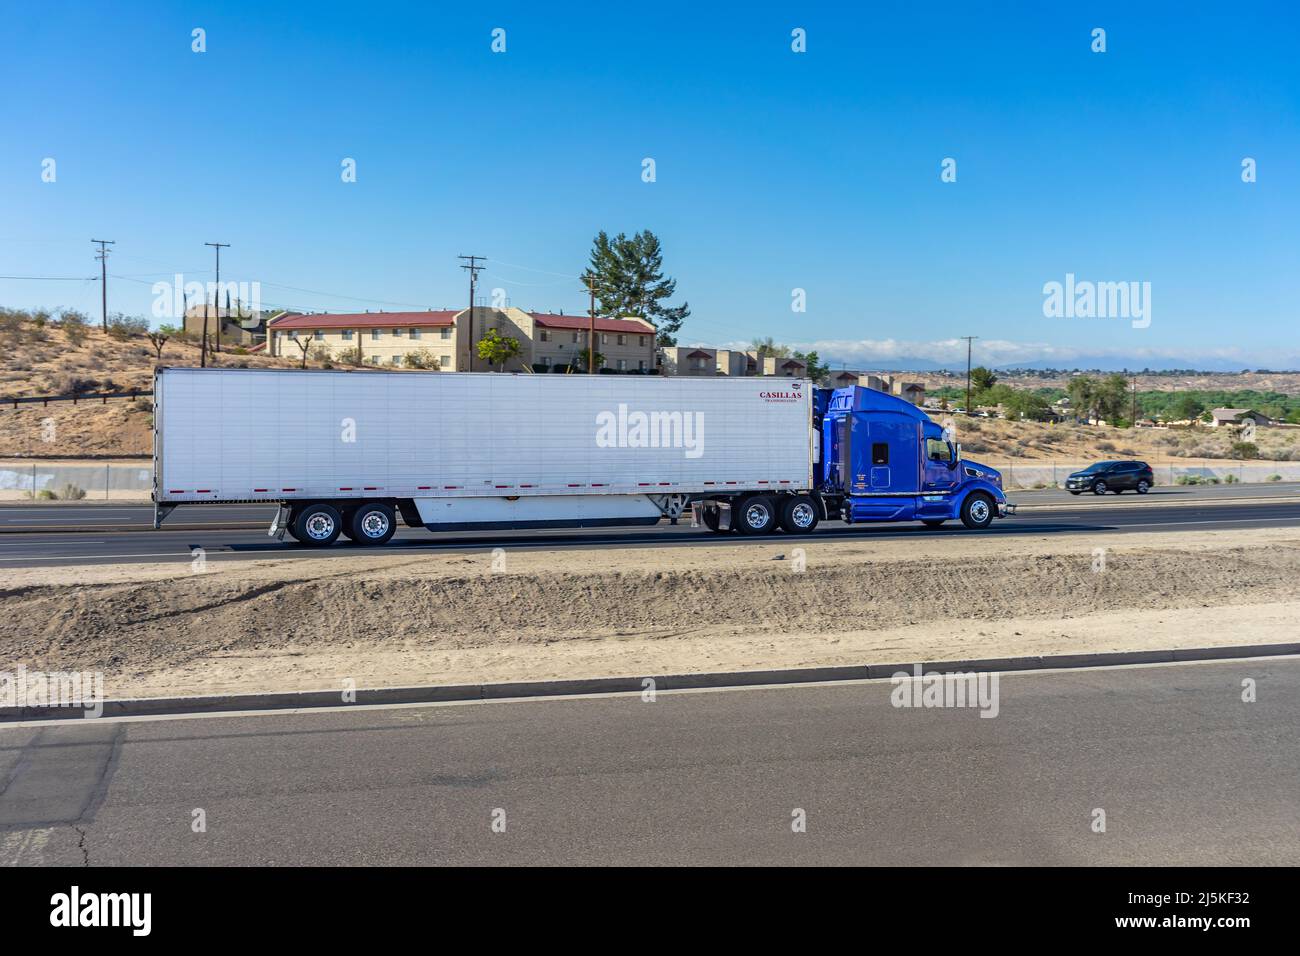 Apple Valley, CA, USA – April 20, 2022: A semi-truck traveling on State Highway 18 in Apple Valley, California. Stock Photo